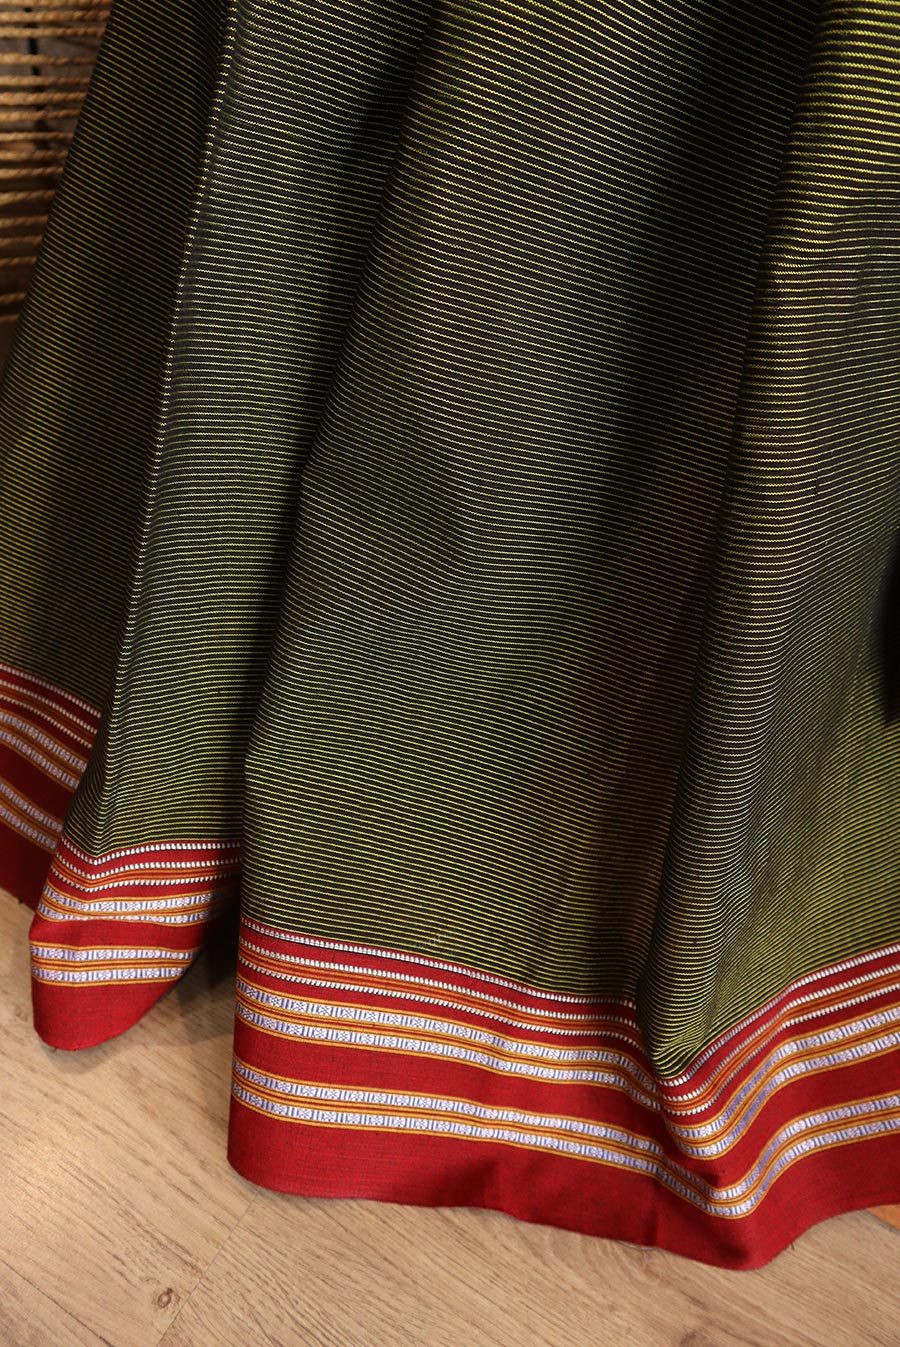 Olive green Ilkal with maroon border (Mercerized cotton)